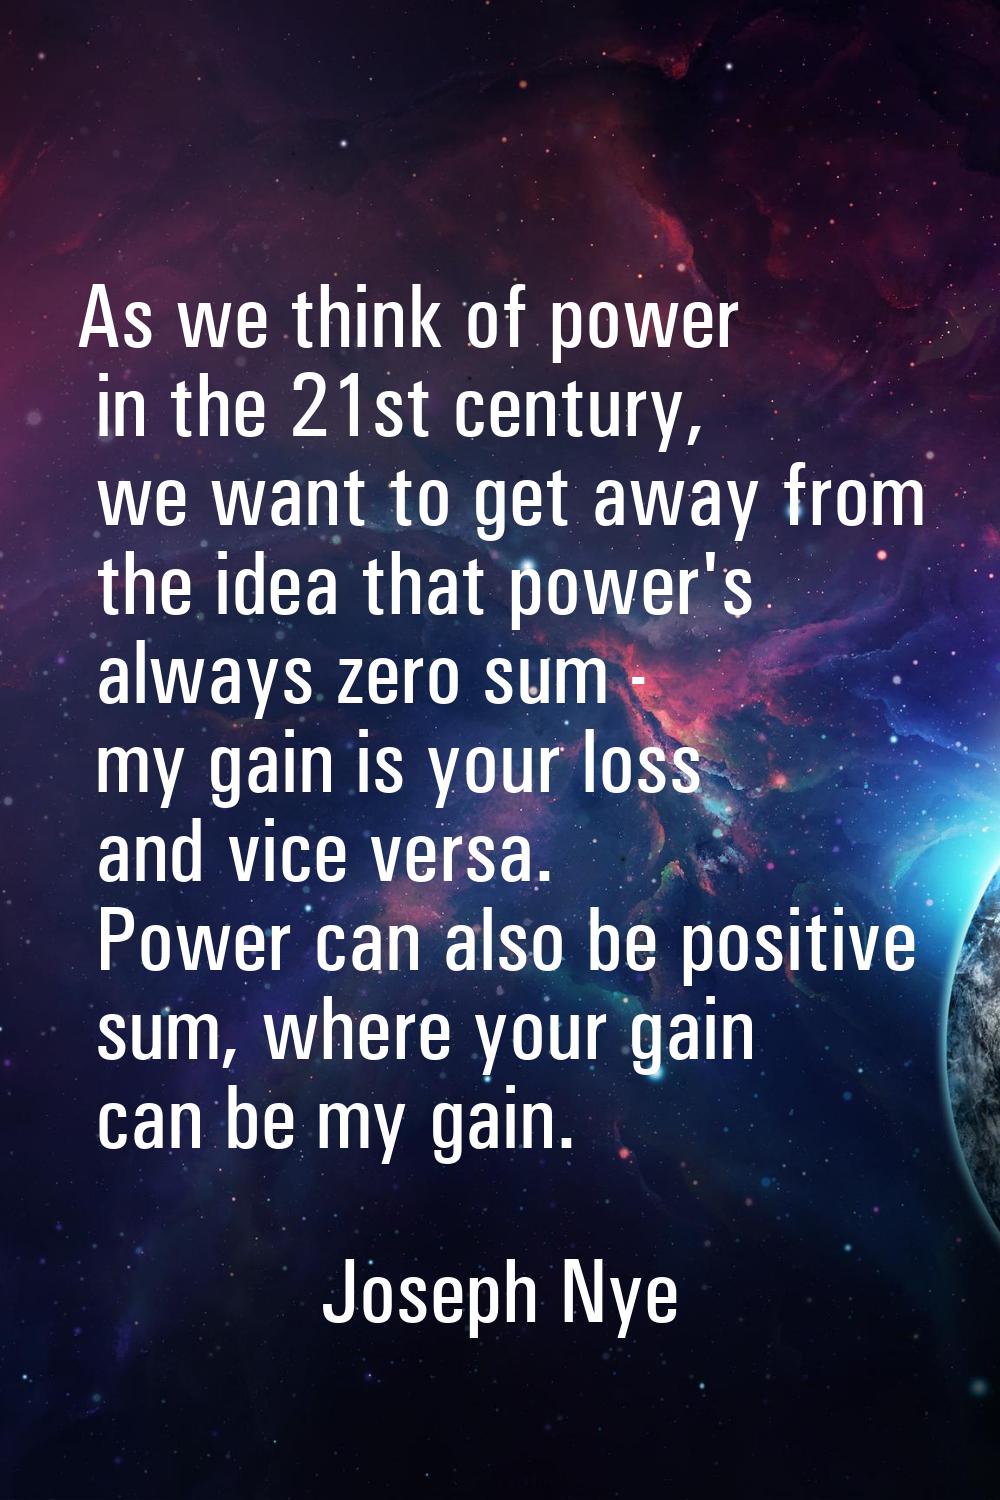 As we think of power in the 21st century, we want to get away from the idea that power's always zer